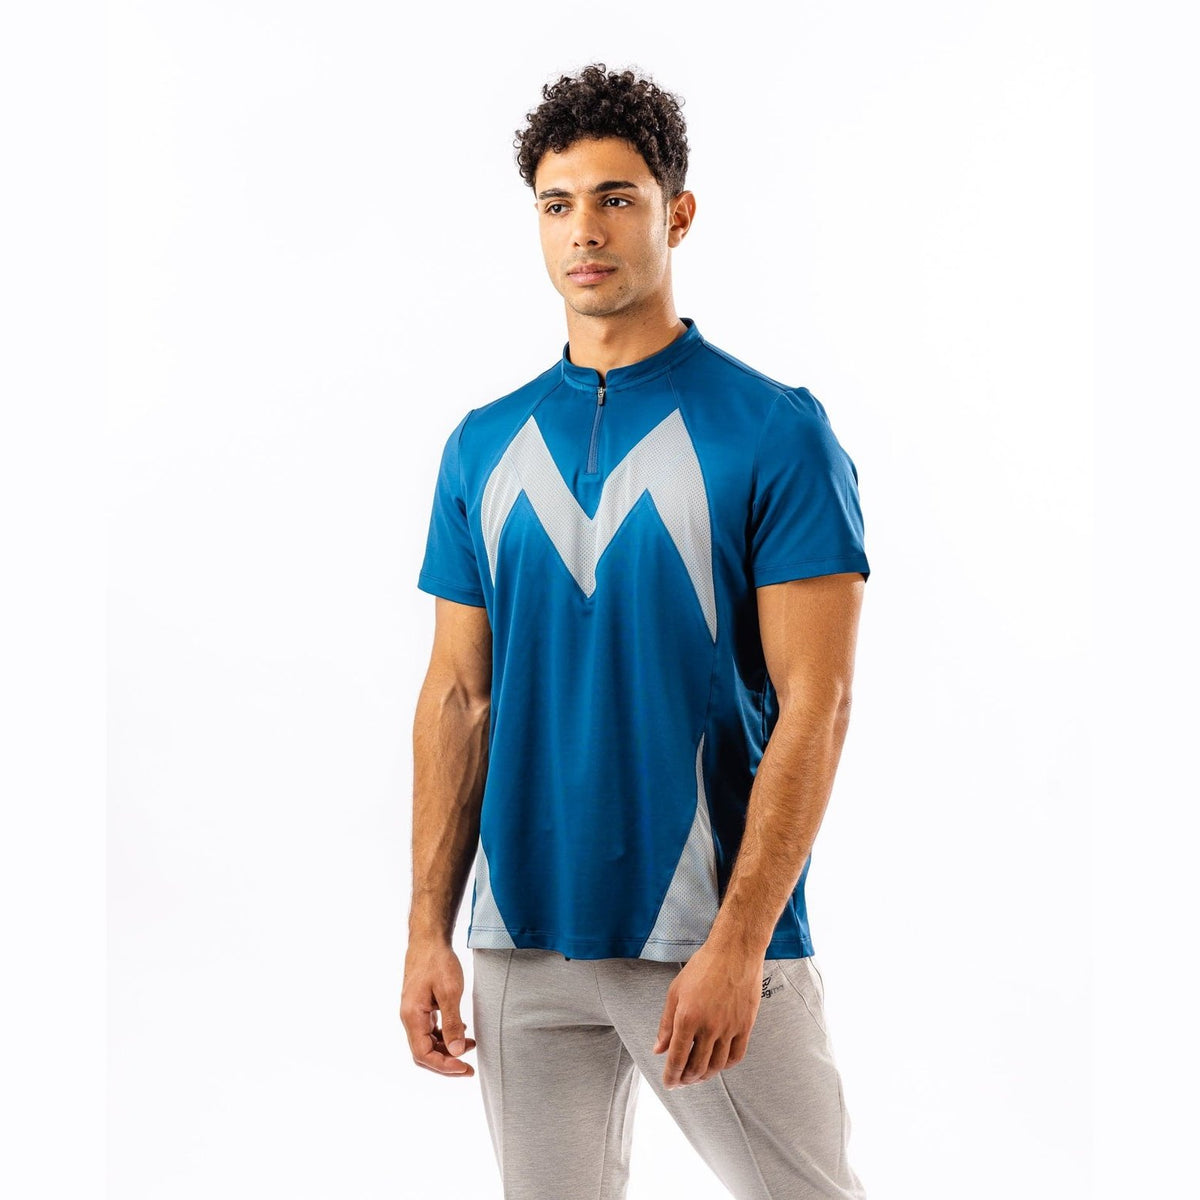 Marvel Training T-shirt in Teal - Sporty Pro